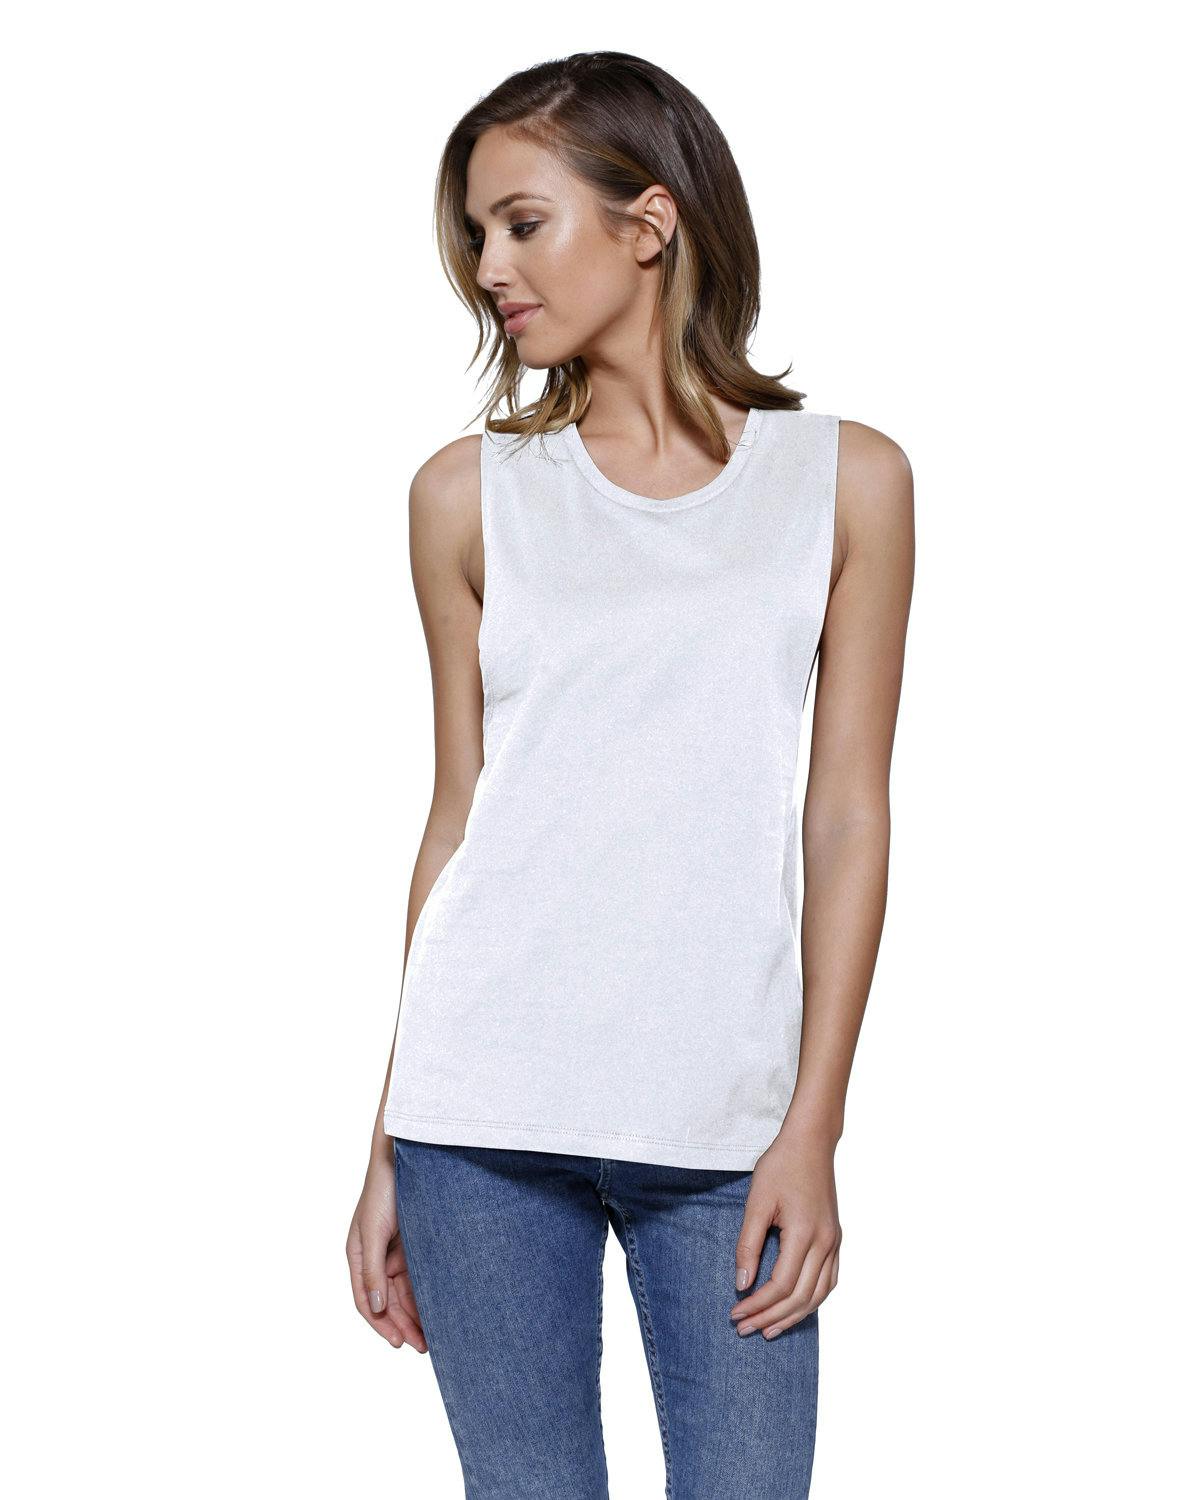 Image for Ladies' Cotton Muscle T-Shirt